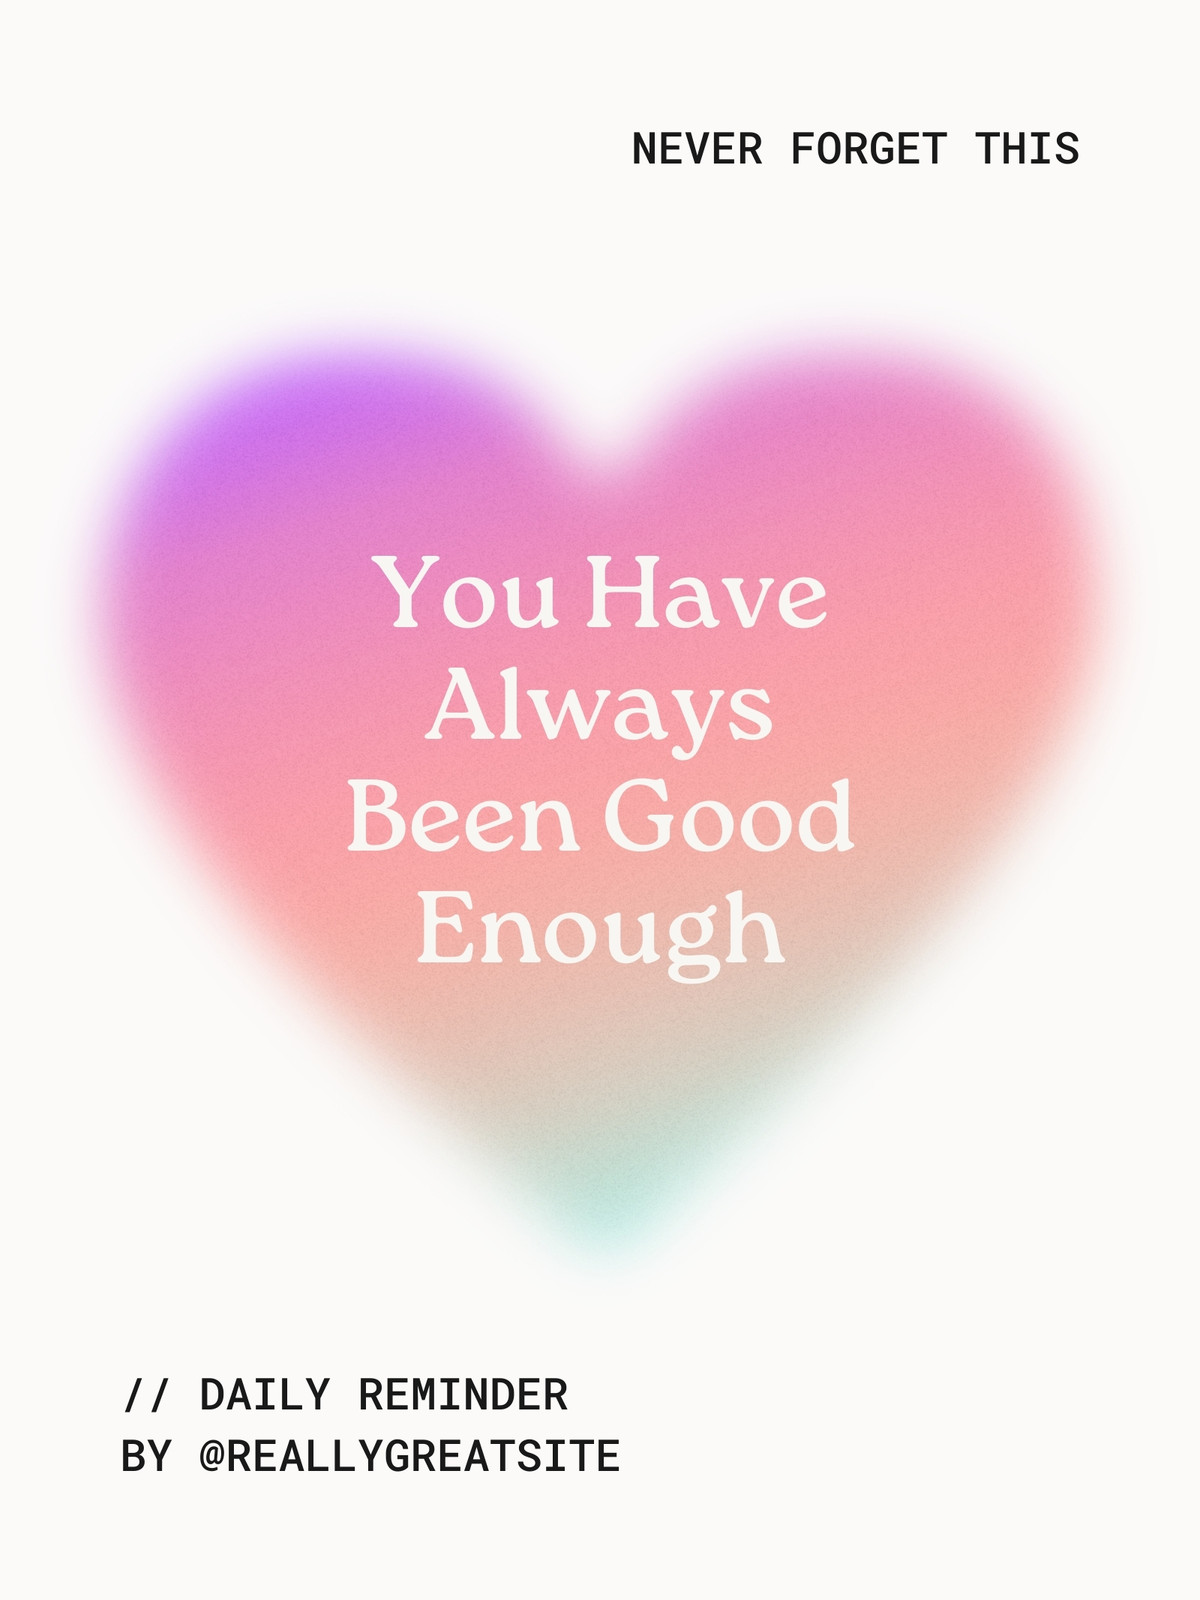 Aesthetic Wallpapers L Self Love iPhone Android 